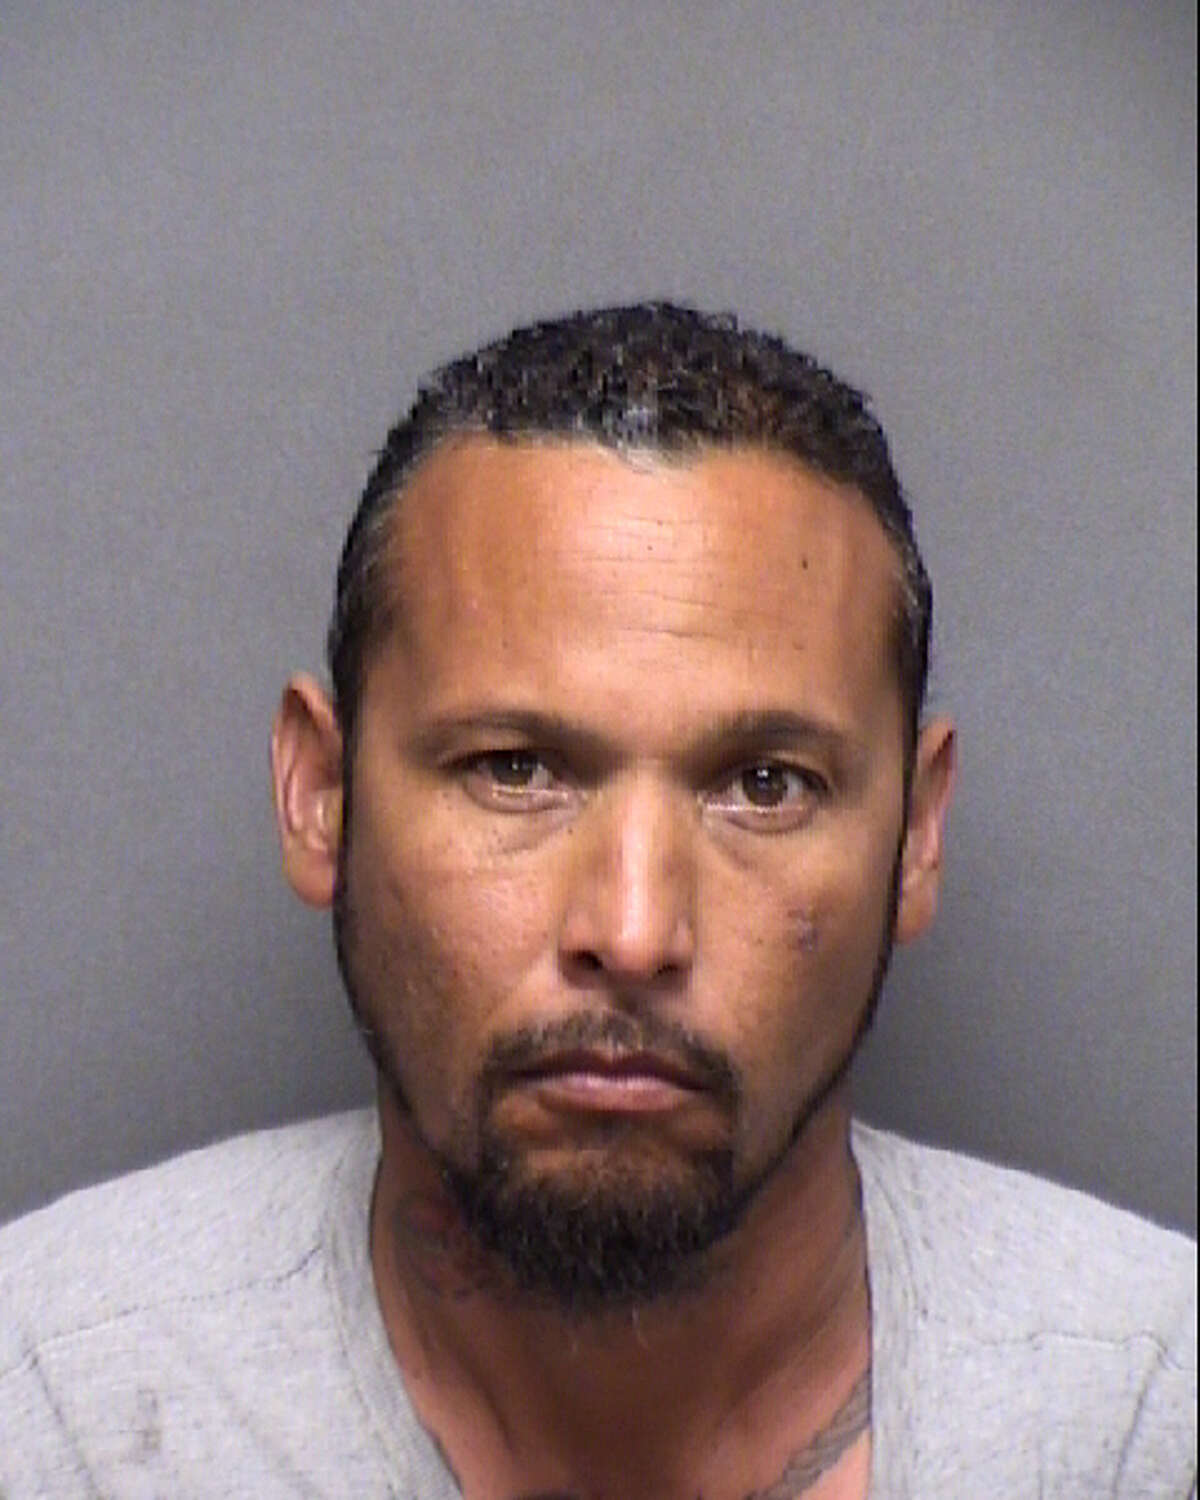 John Delgado, 42, was sentenced to 50 years in prison for aggravated sexual assault of a child.